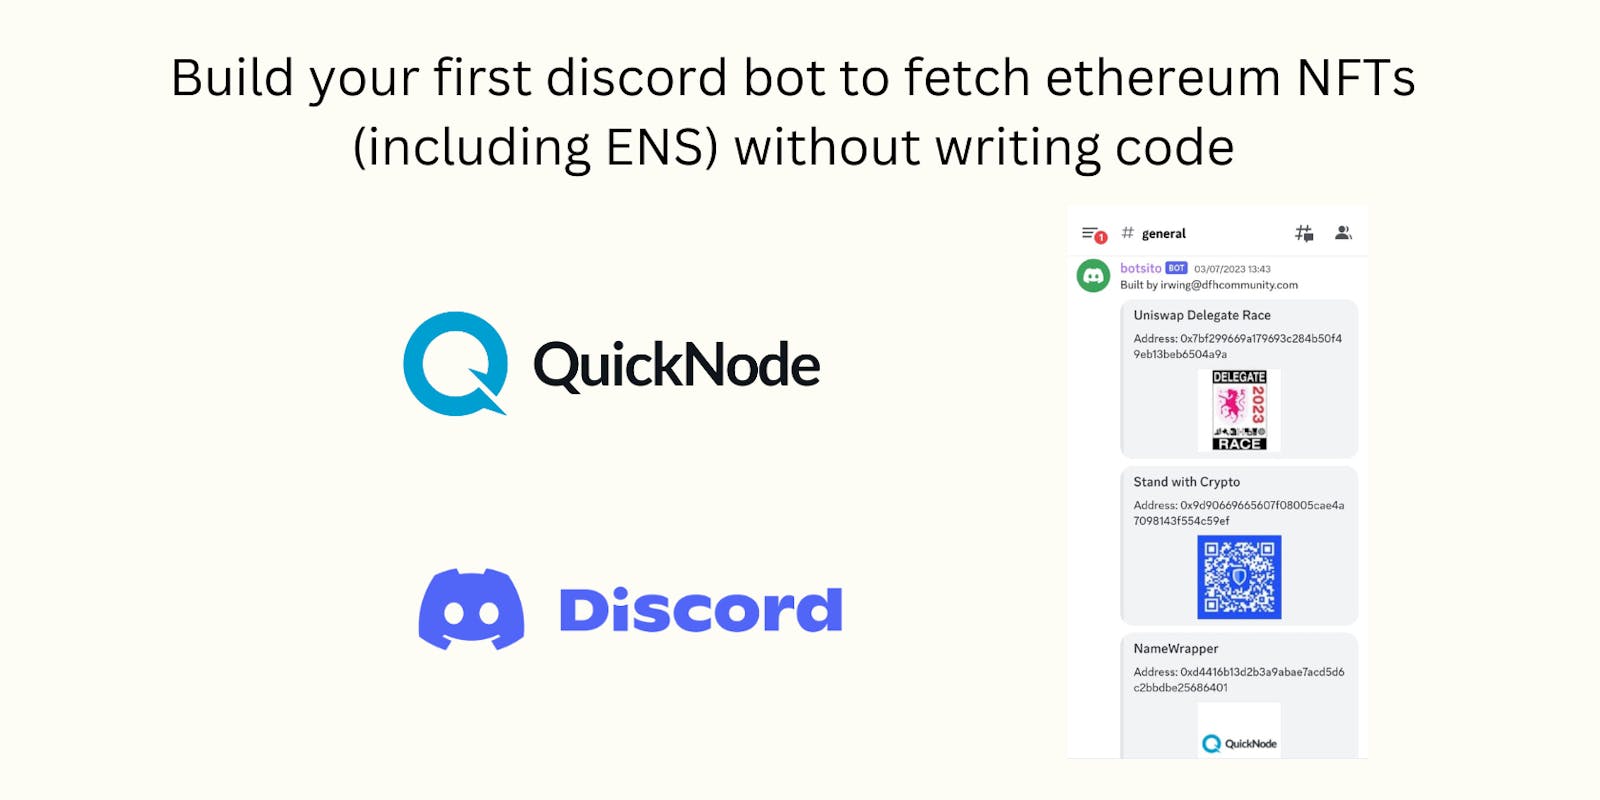 Build your first discord bot to fetch ethereum NFTs (including ENS) without writing code